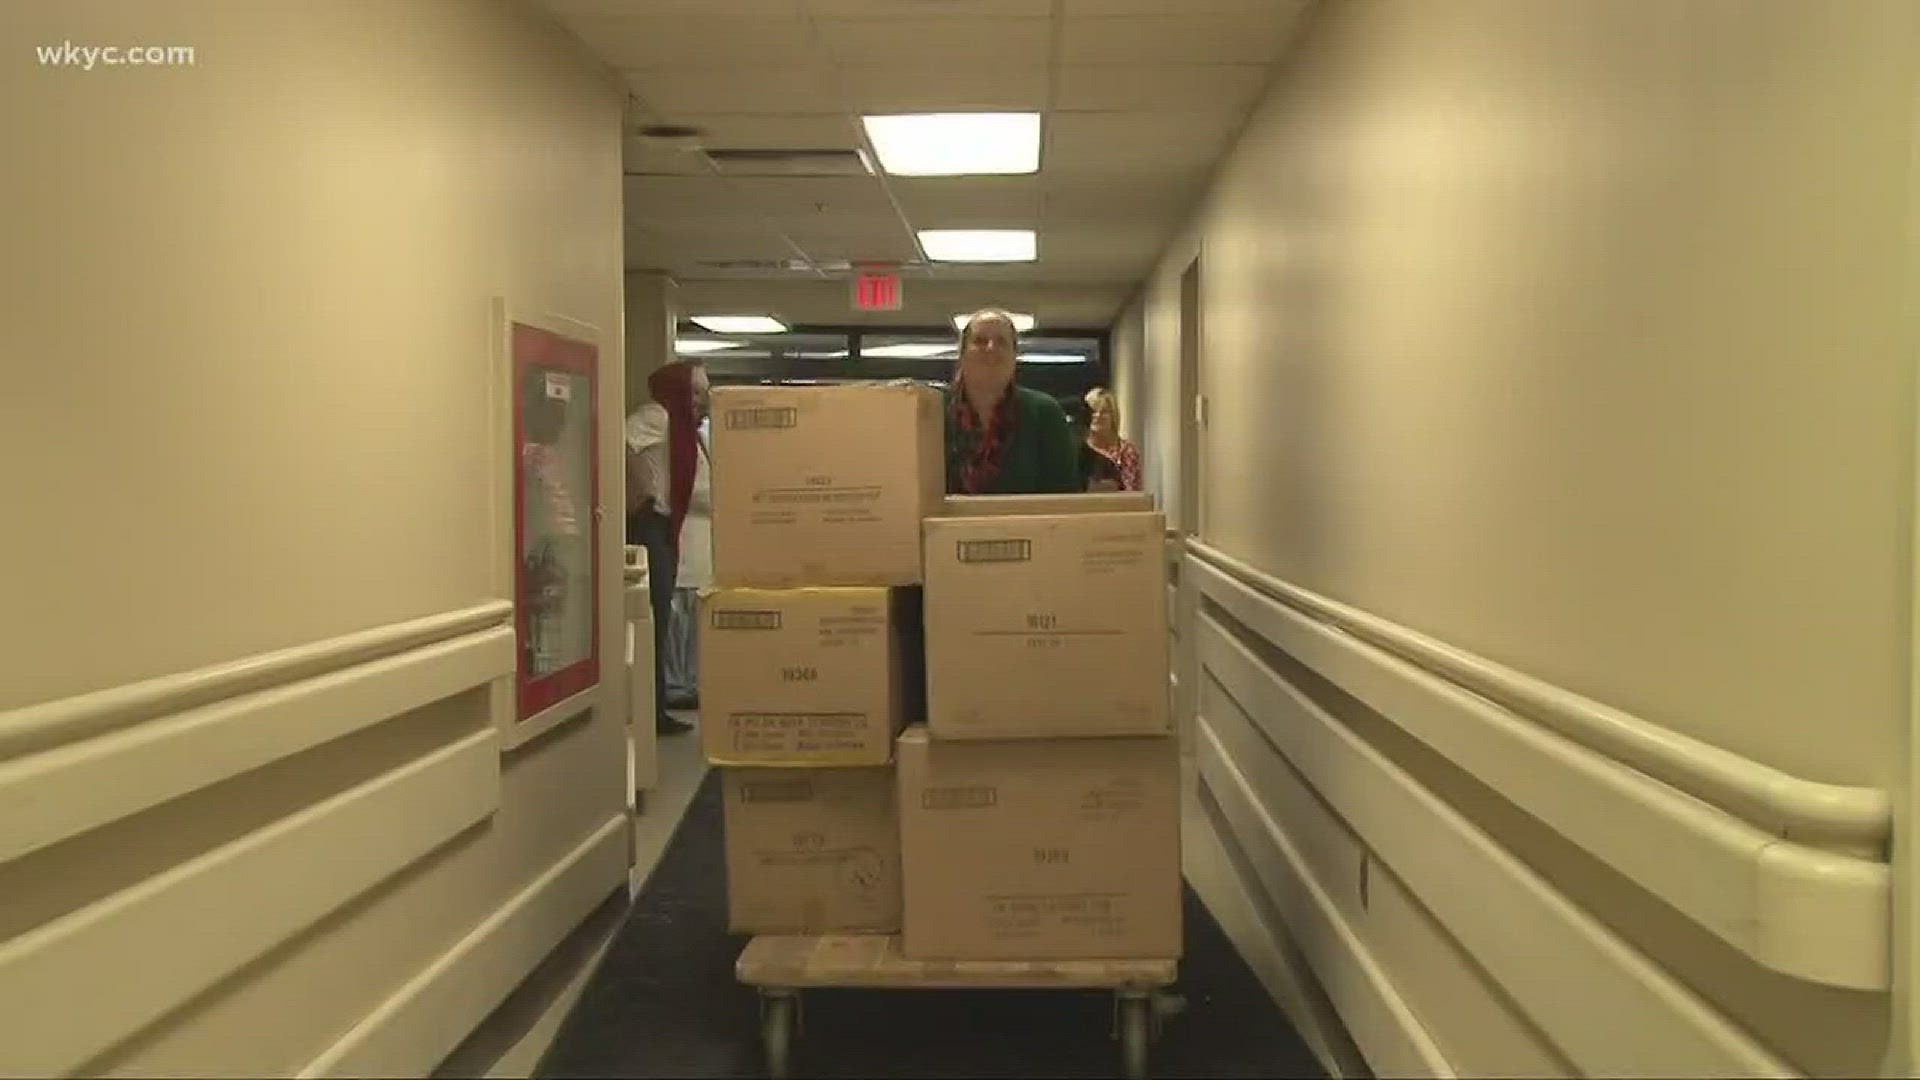 Donated toys delivered to MetroHealth Medical Center for sick kids